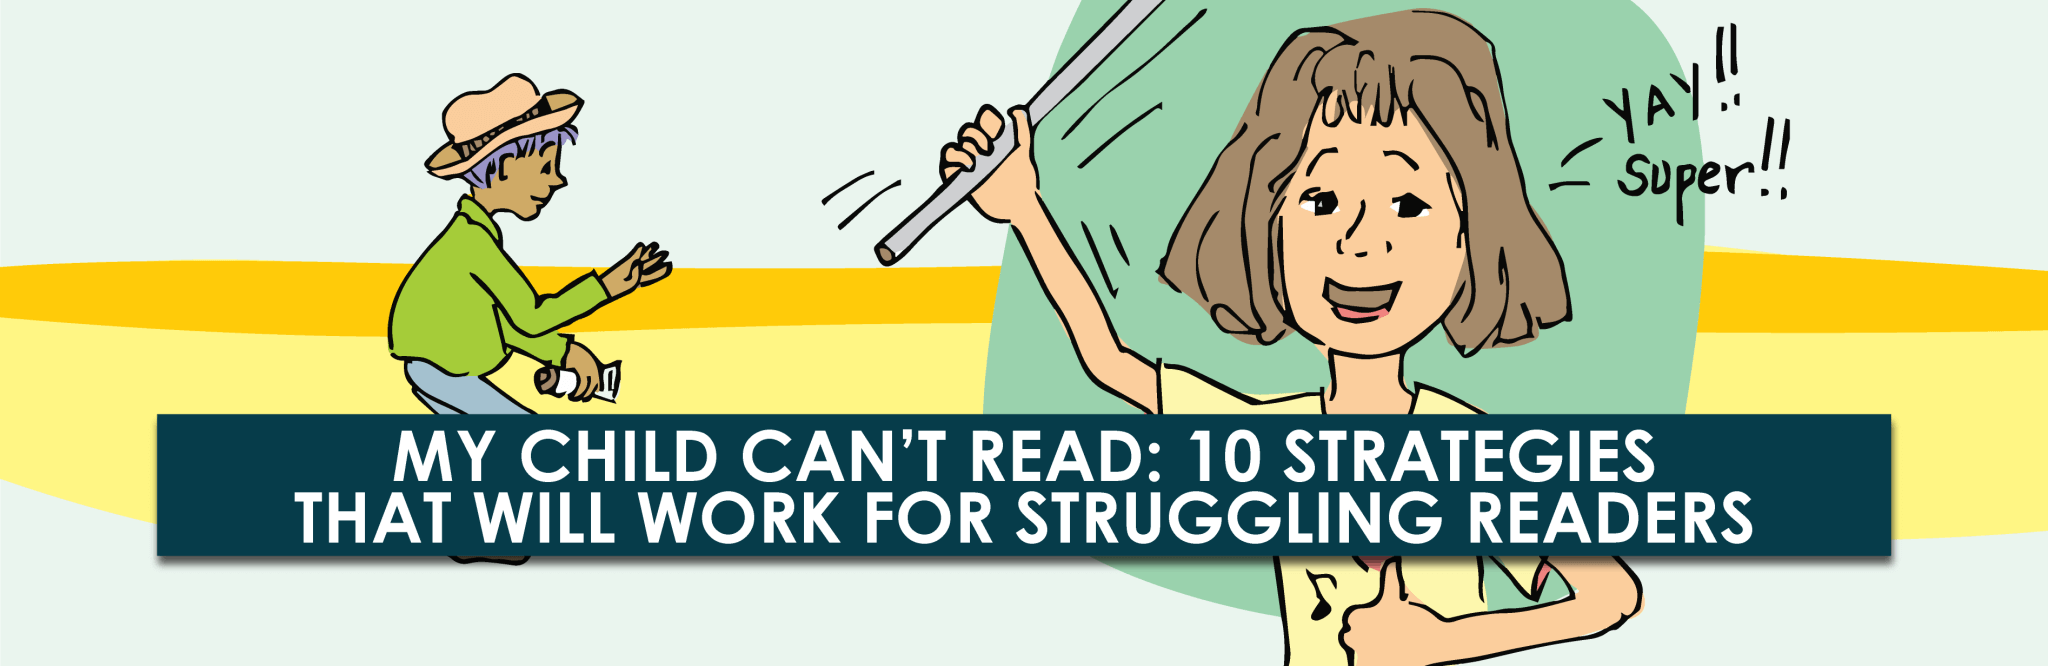 My Child Can't Read: 10 Strategies That Will Work For Struggling Readers